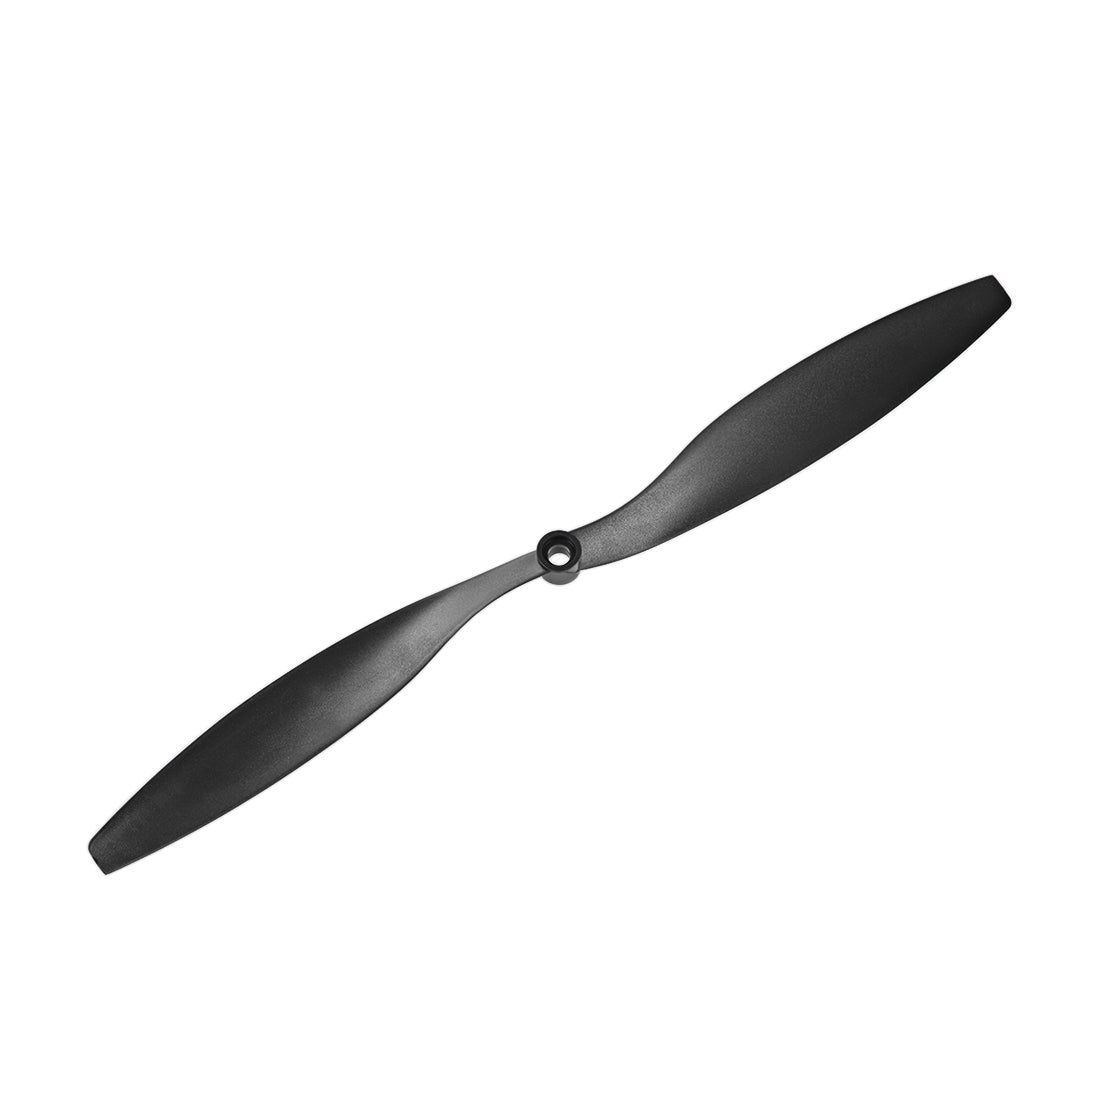 uxcell Uxcell RC Propellers CW CCW 1245 12x4.5 Inch 2-Vane Fixed-Wing for Airplane Toy, Nylon Black 2 Pair with Adapter Rings